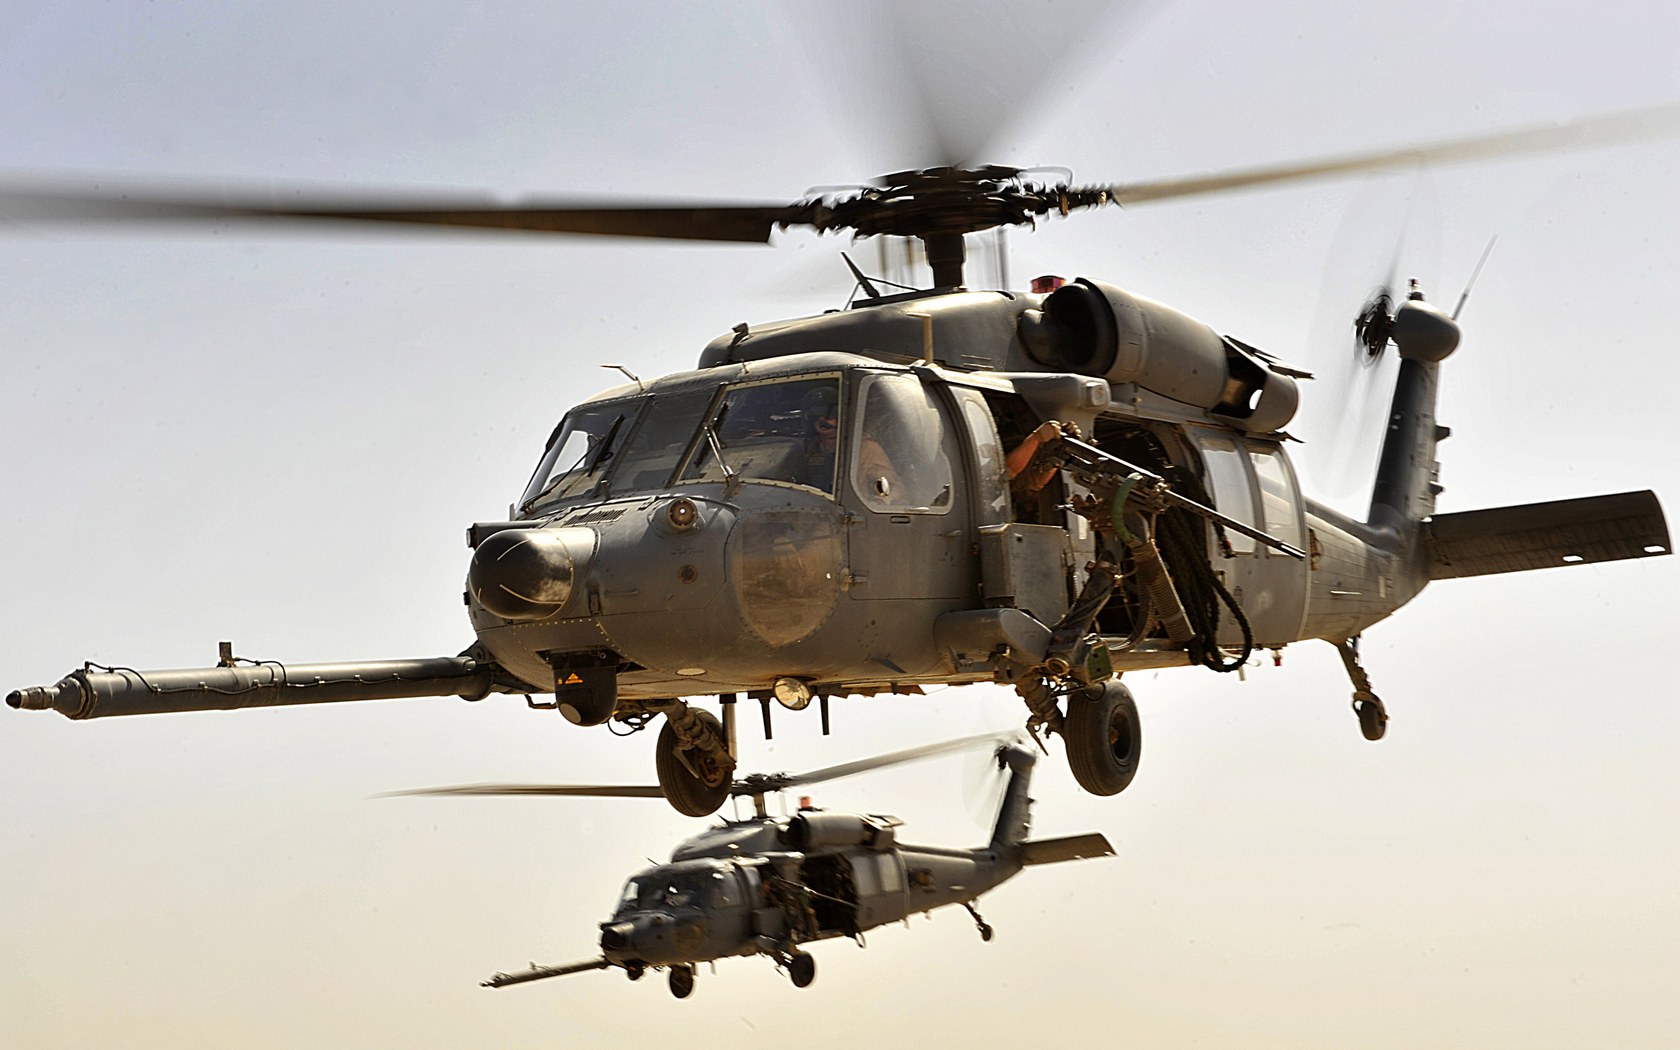 Download High quality HH-60G Pave Hawk Helicopter wallpaper / 1680x1050